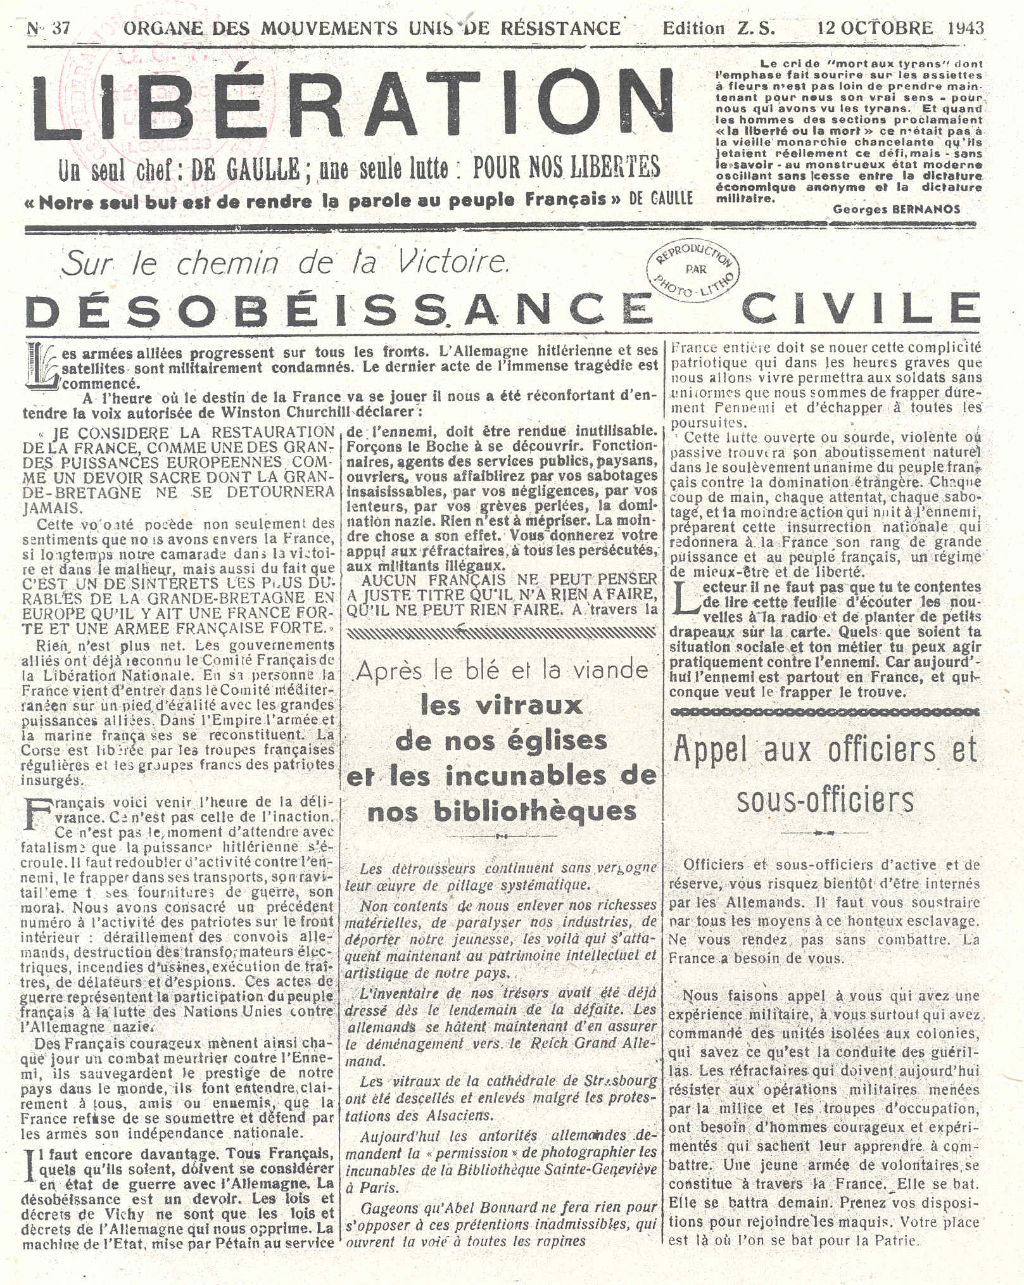 French resistance leaflet hailing the martyrs of France, undated